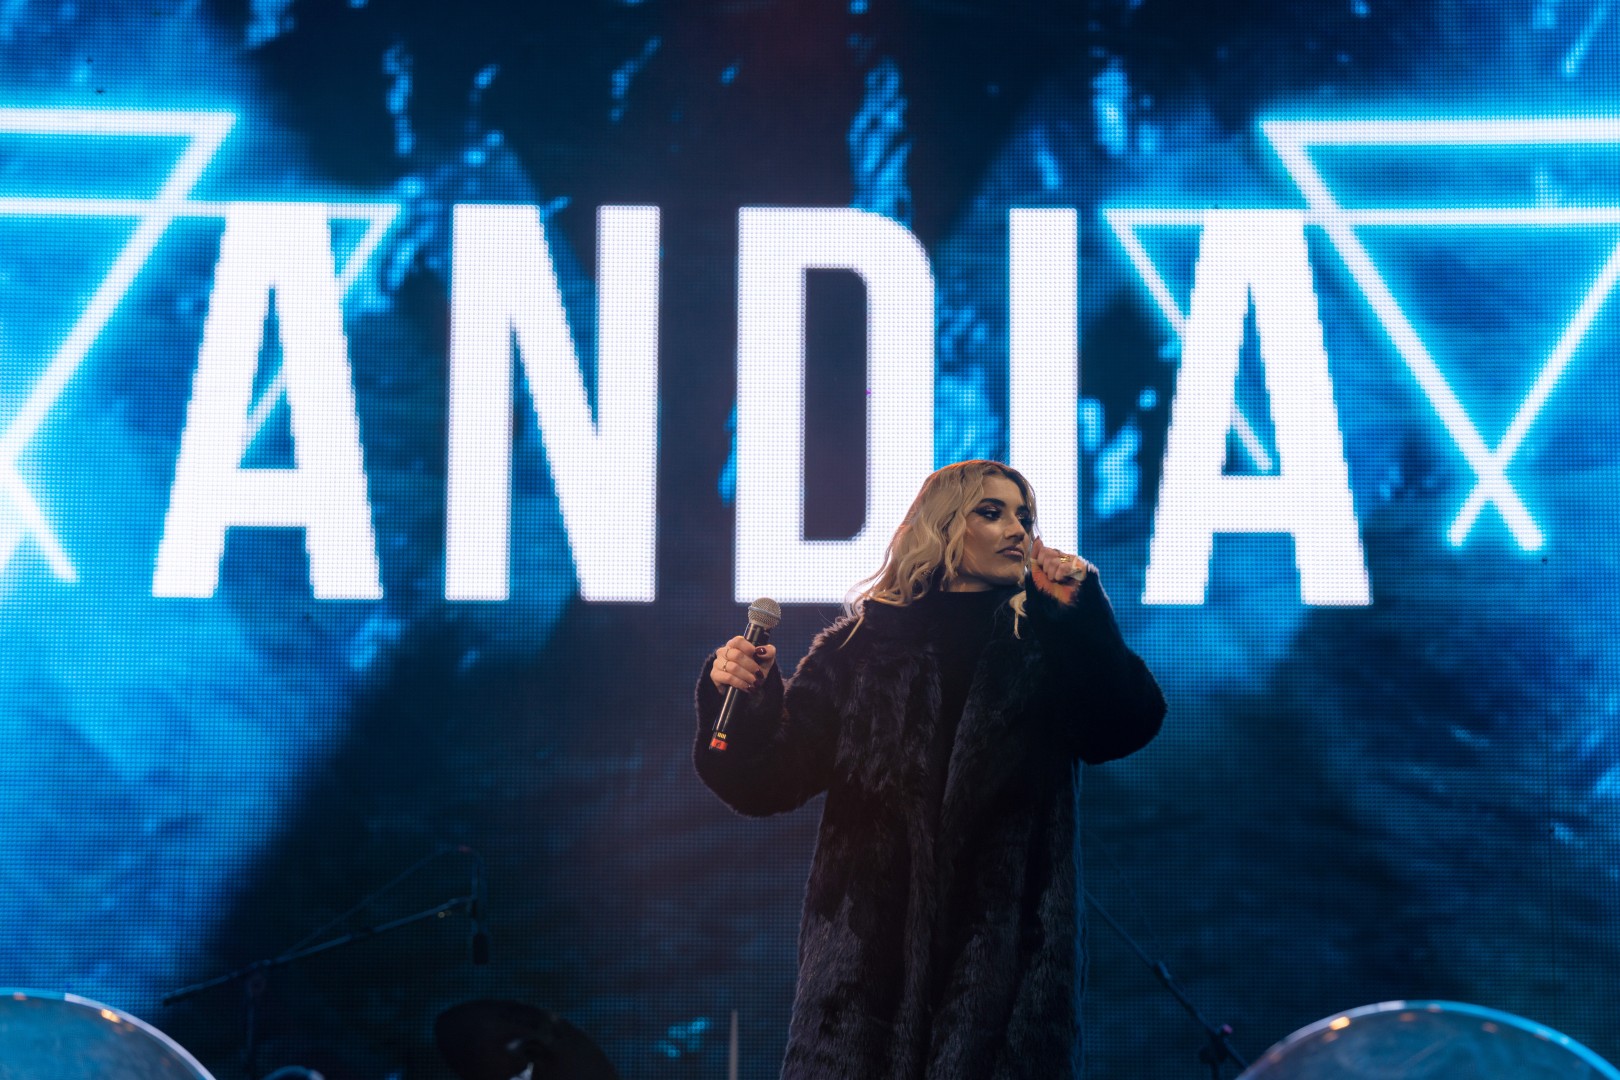 Andia at National Arena in Bucharest on March 12, 2022 (b4abdc419c)